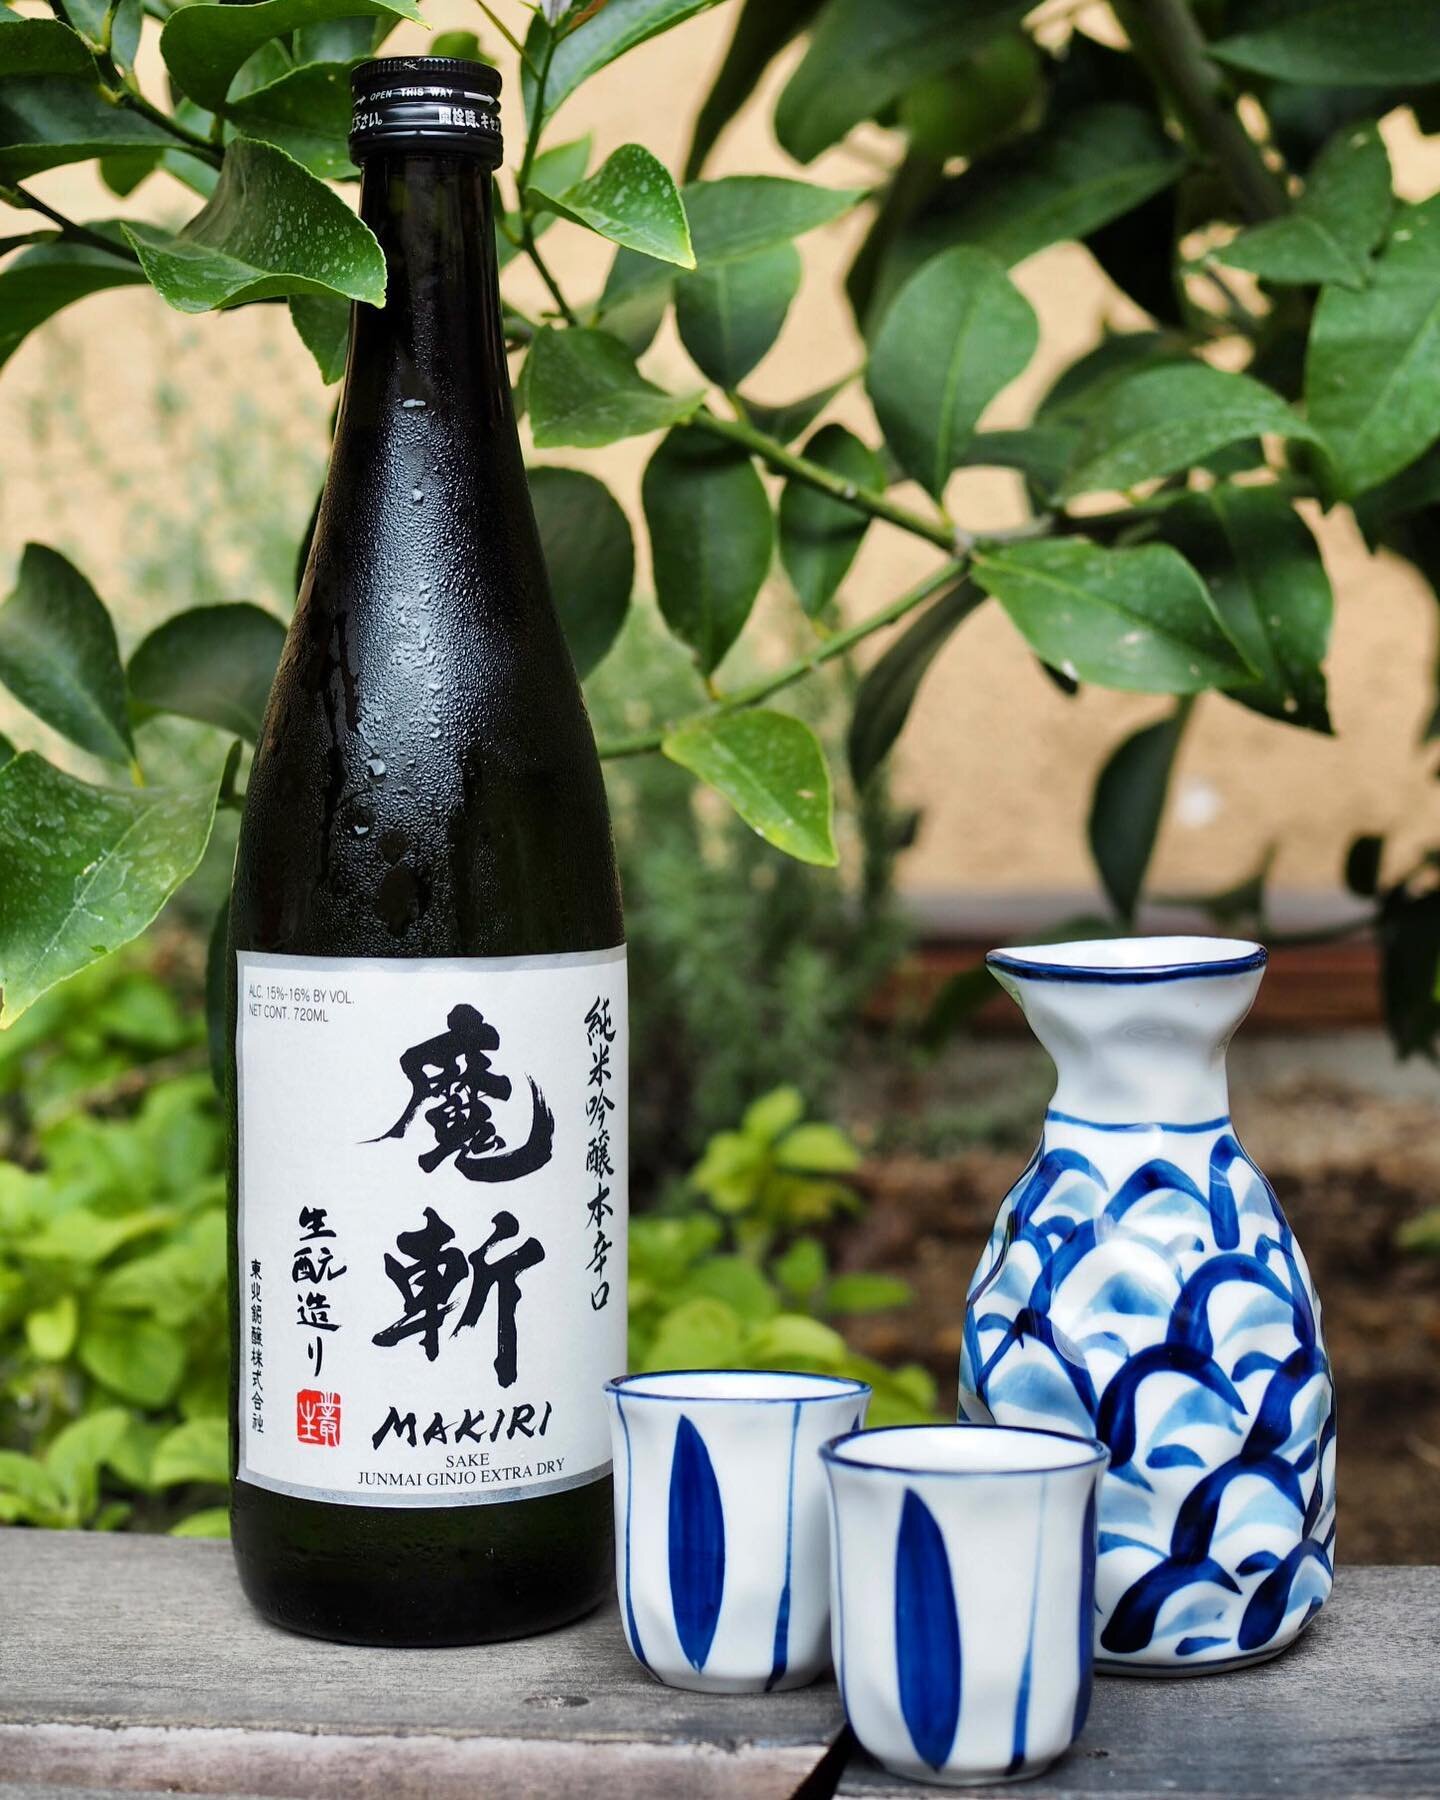 Makiri Junmai Ginjo Extra Dry

If you are looking for a very dry sake, Makiri is the choice for you. Because of its dryness, this sake pairs with our food. 

We have a variety of sake selections to choose from at our restaurant. Please come and try a